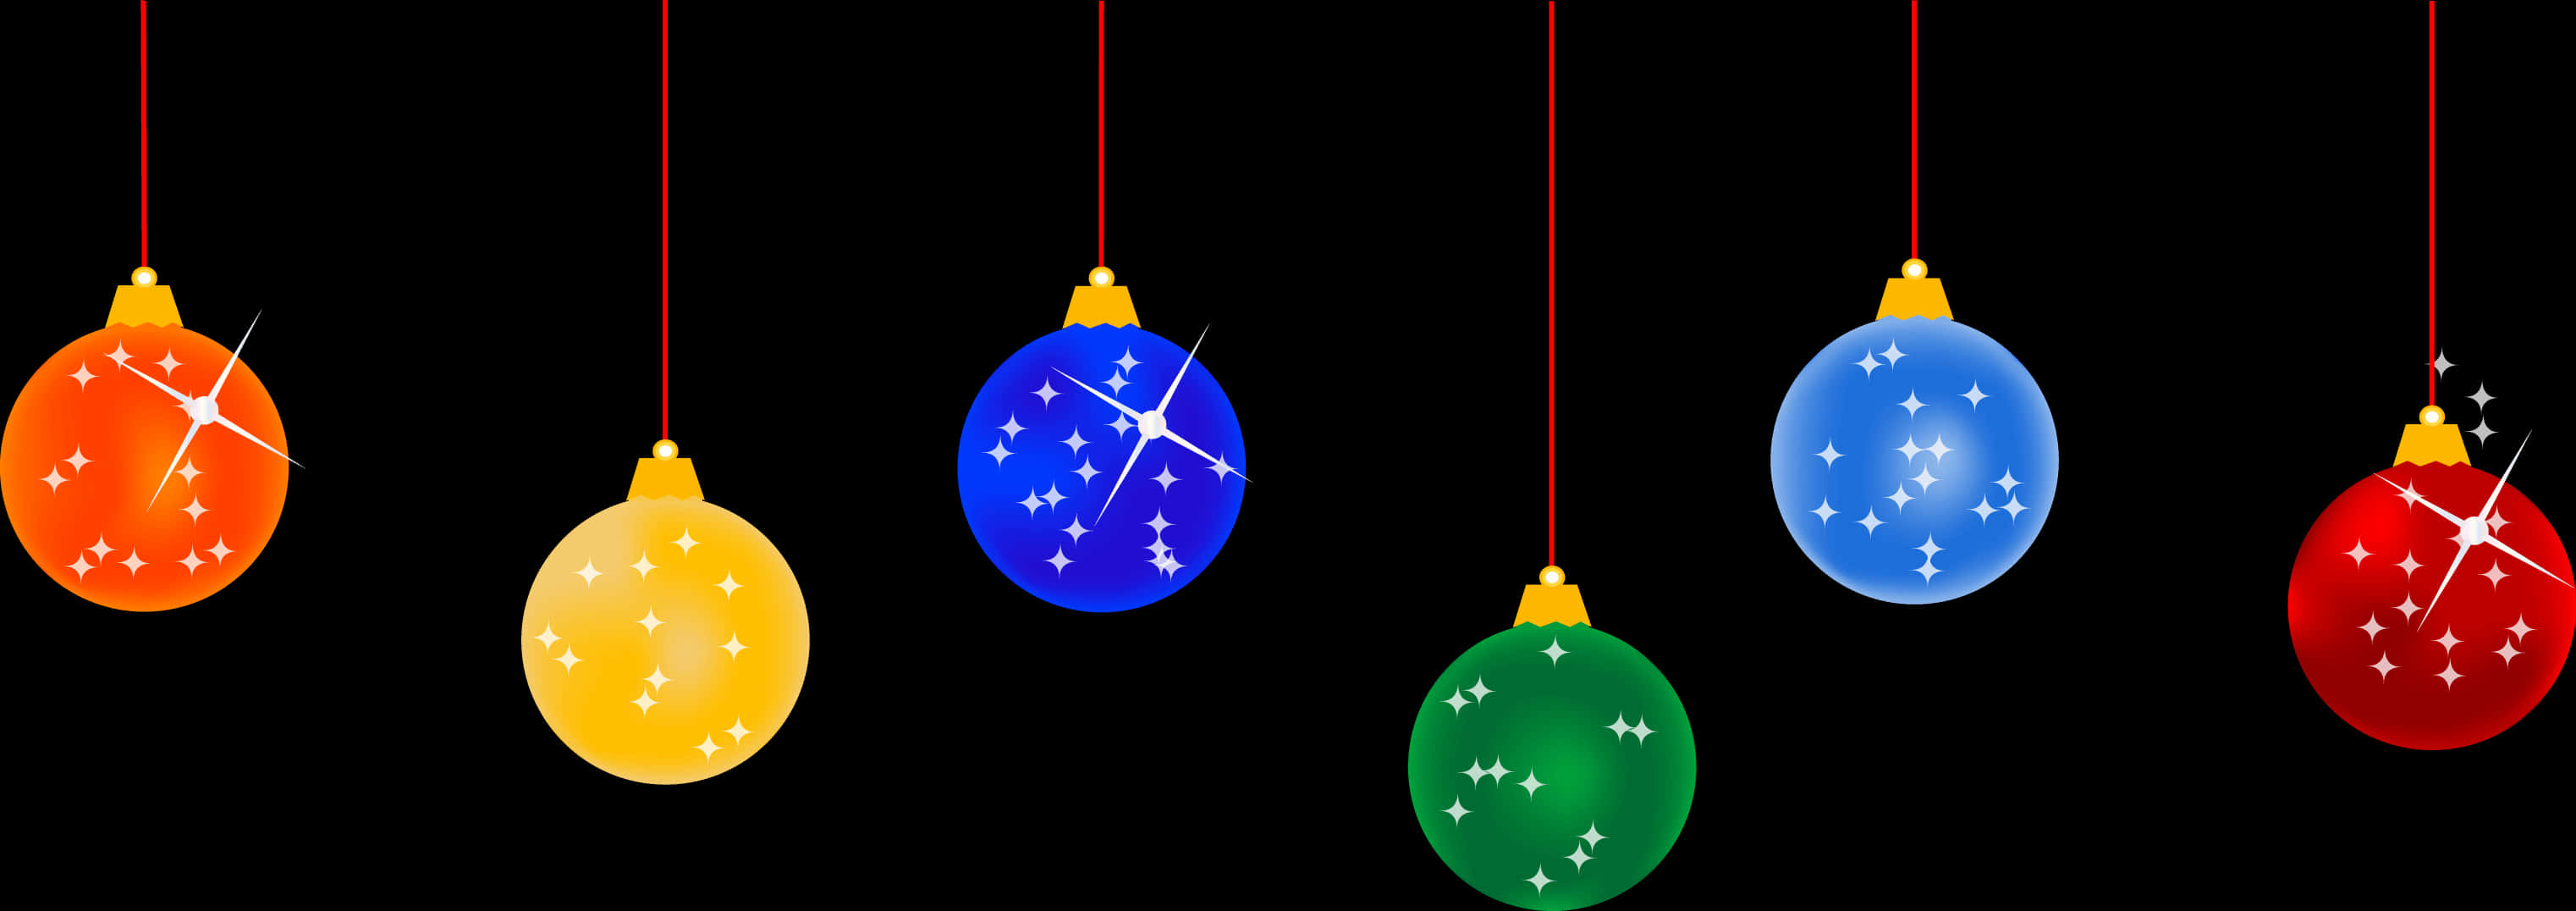 A Pair Of Christmas Ornaments